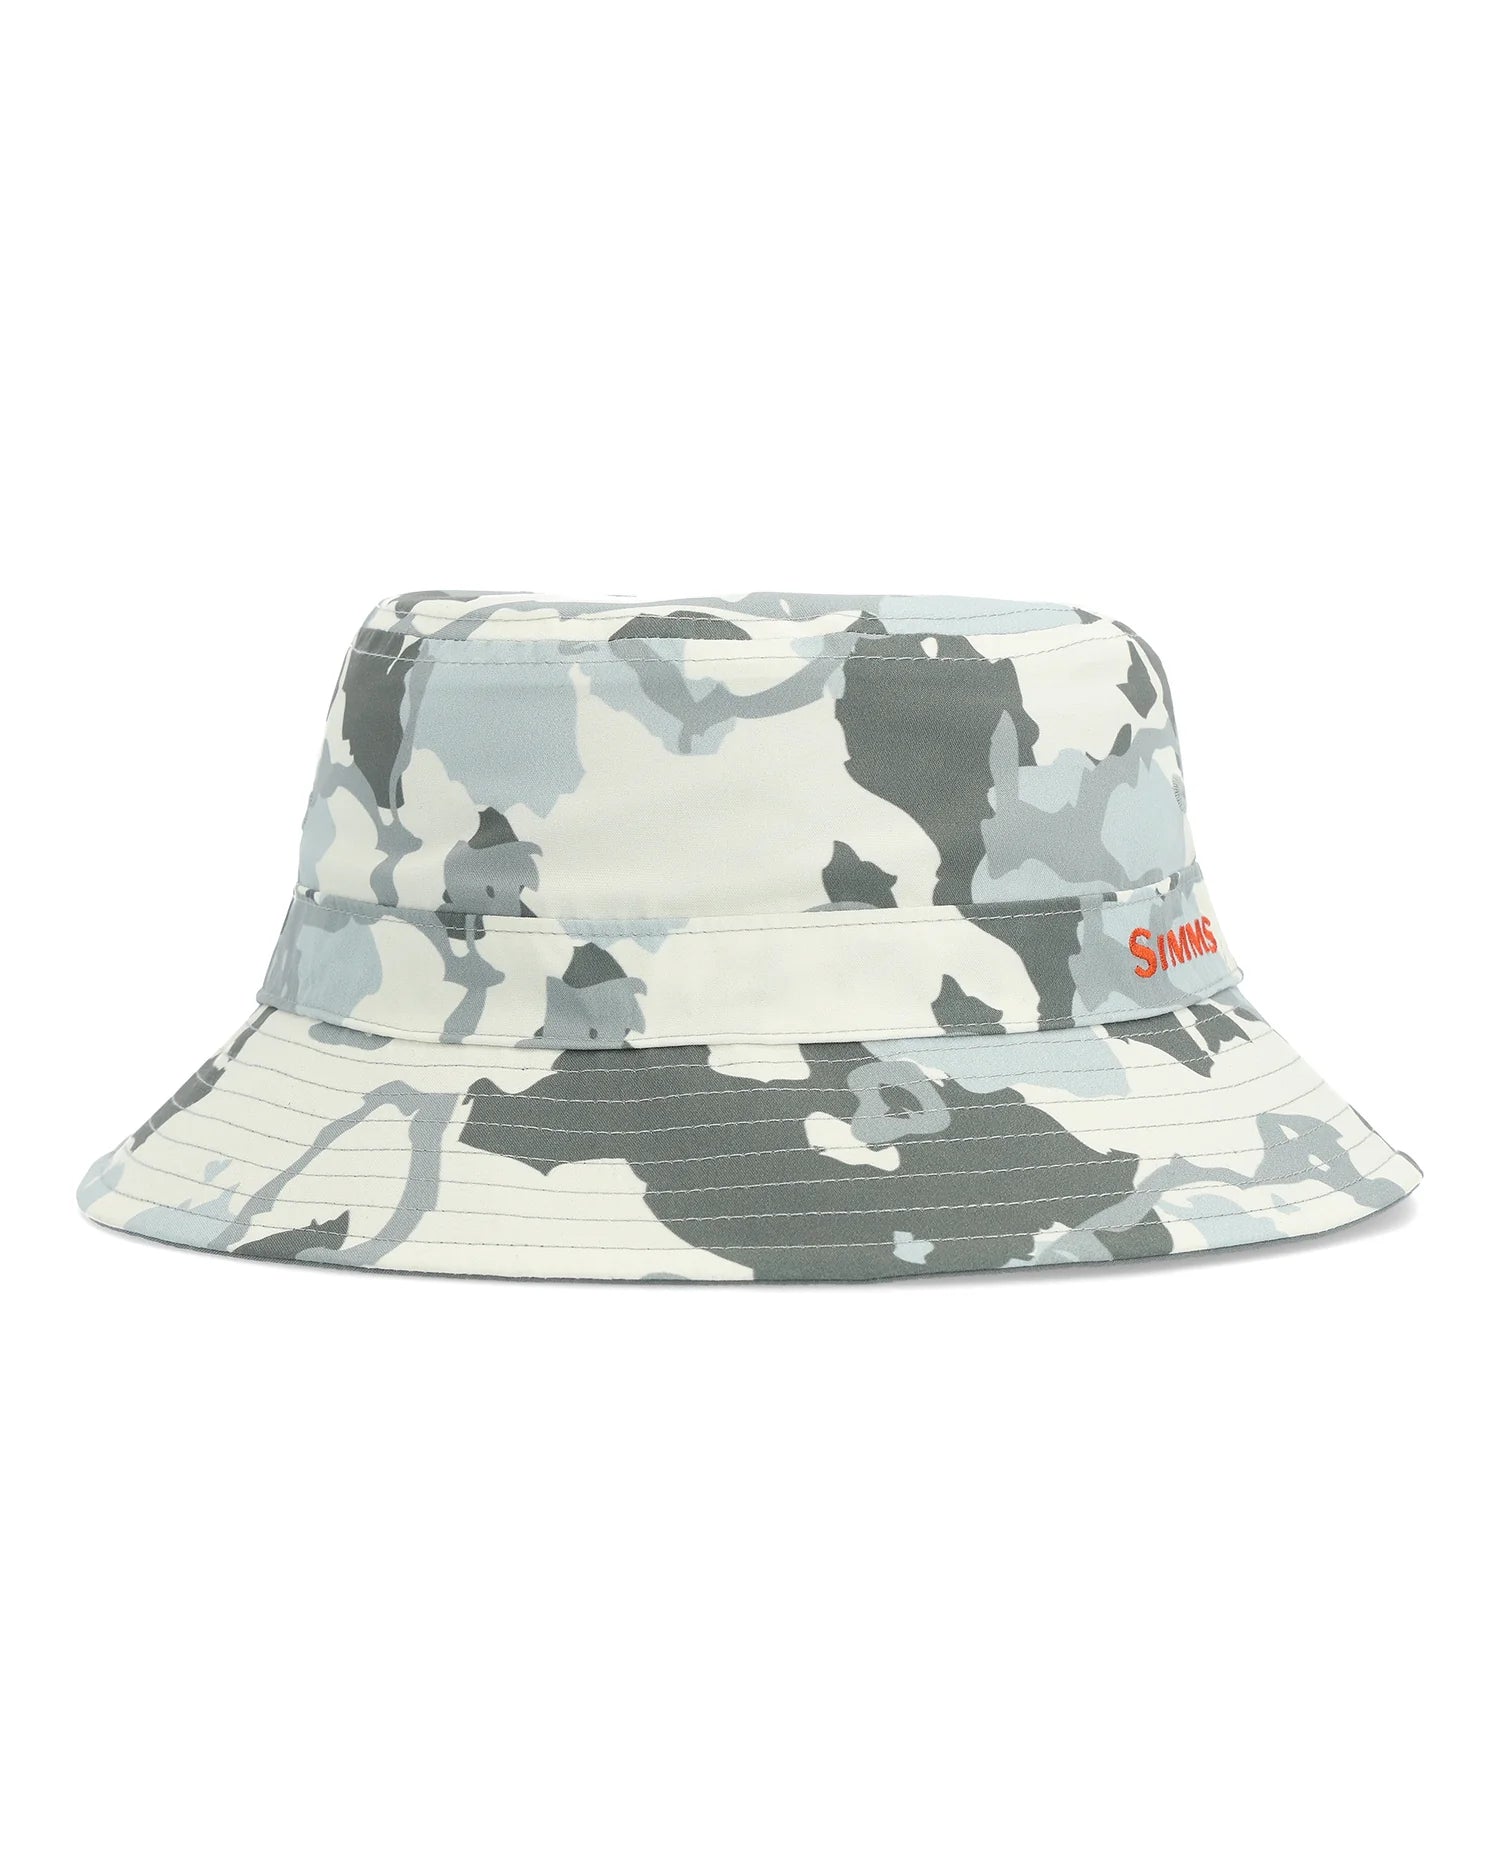 https://ptboprotackle.ca/cdn/shop/products/13732-2003-bucket-hat-tabletop-s23-4_1500x_e4953f98-cd09-490e-be9c-c71acd57e9ba.webp?v=1680294624&width=1500